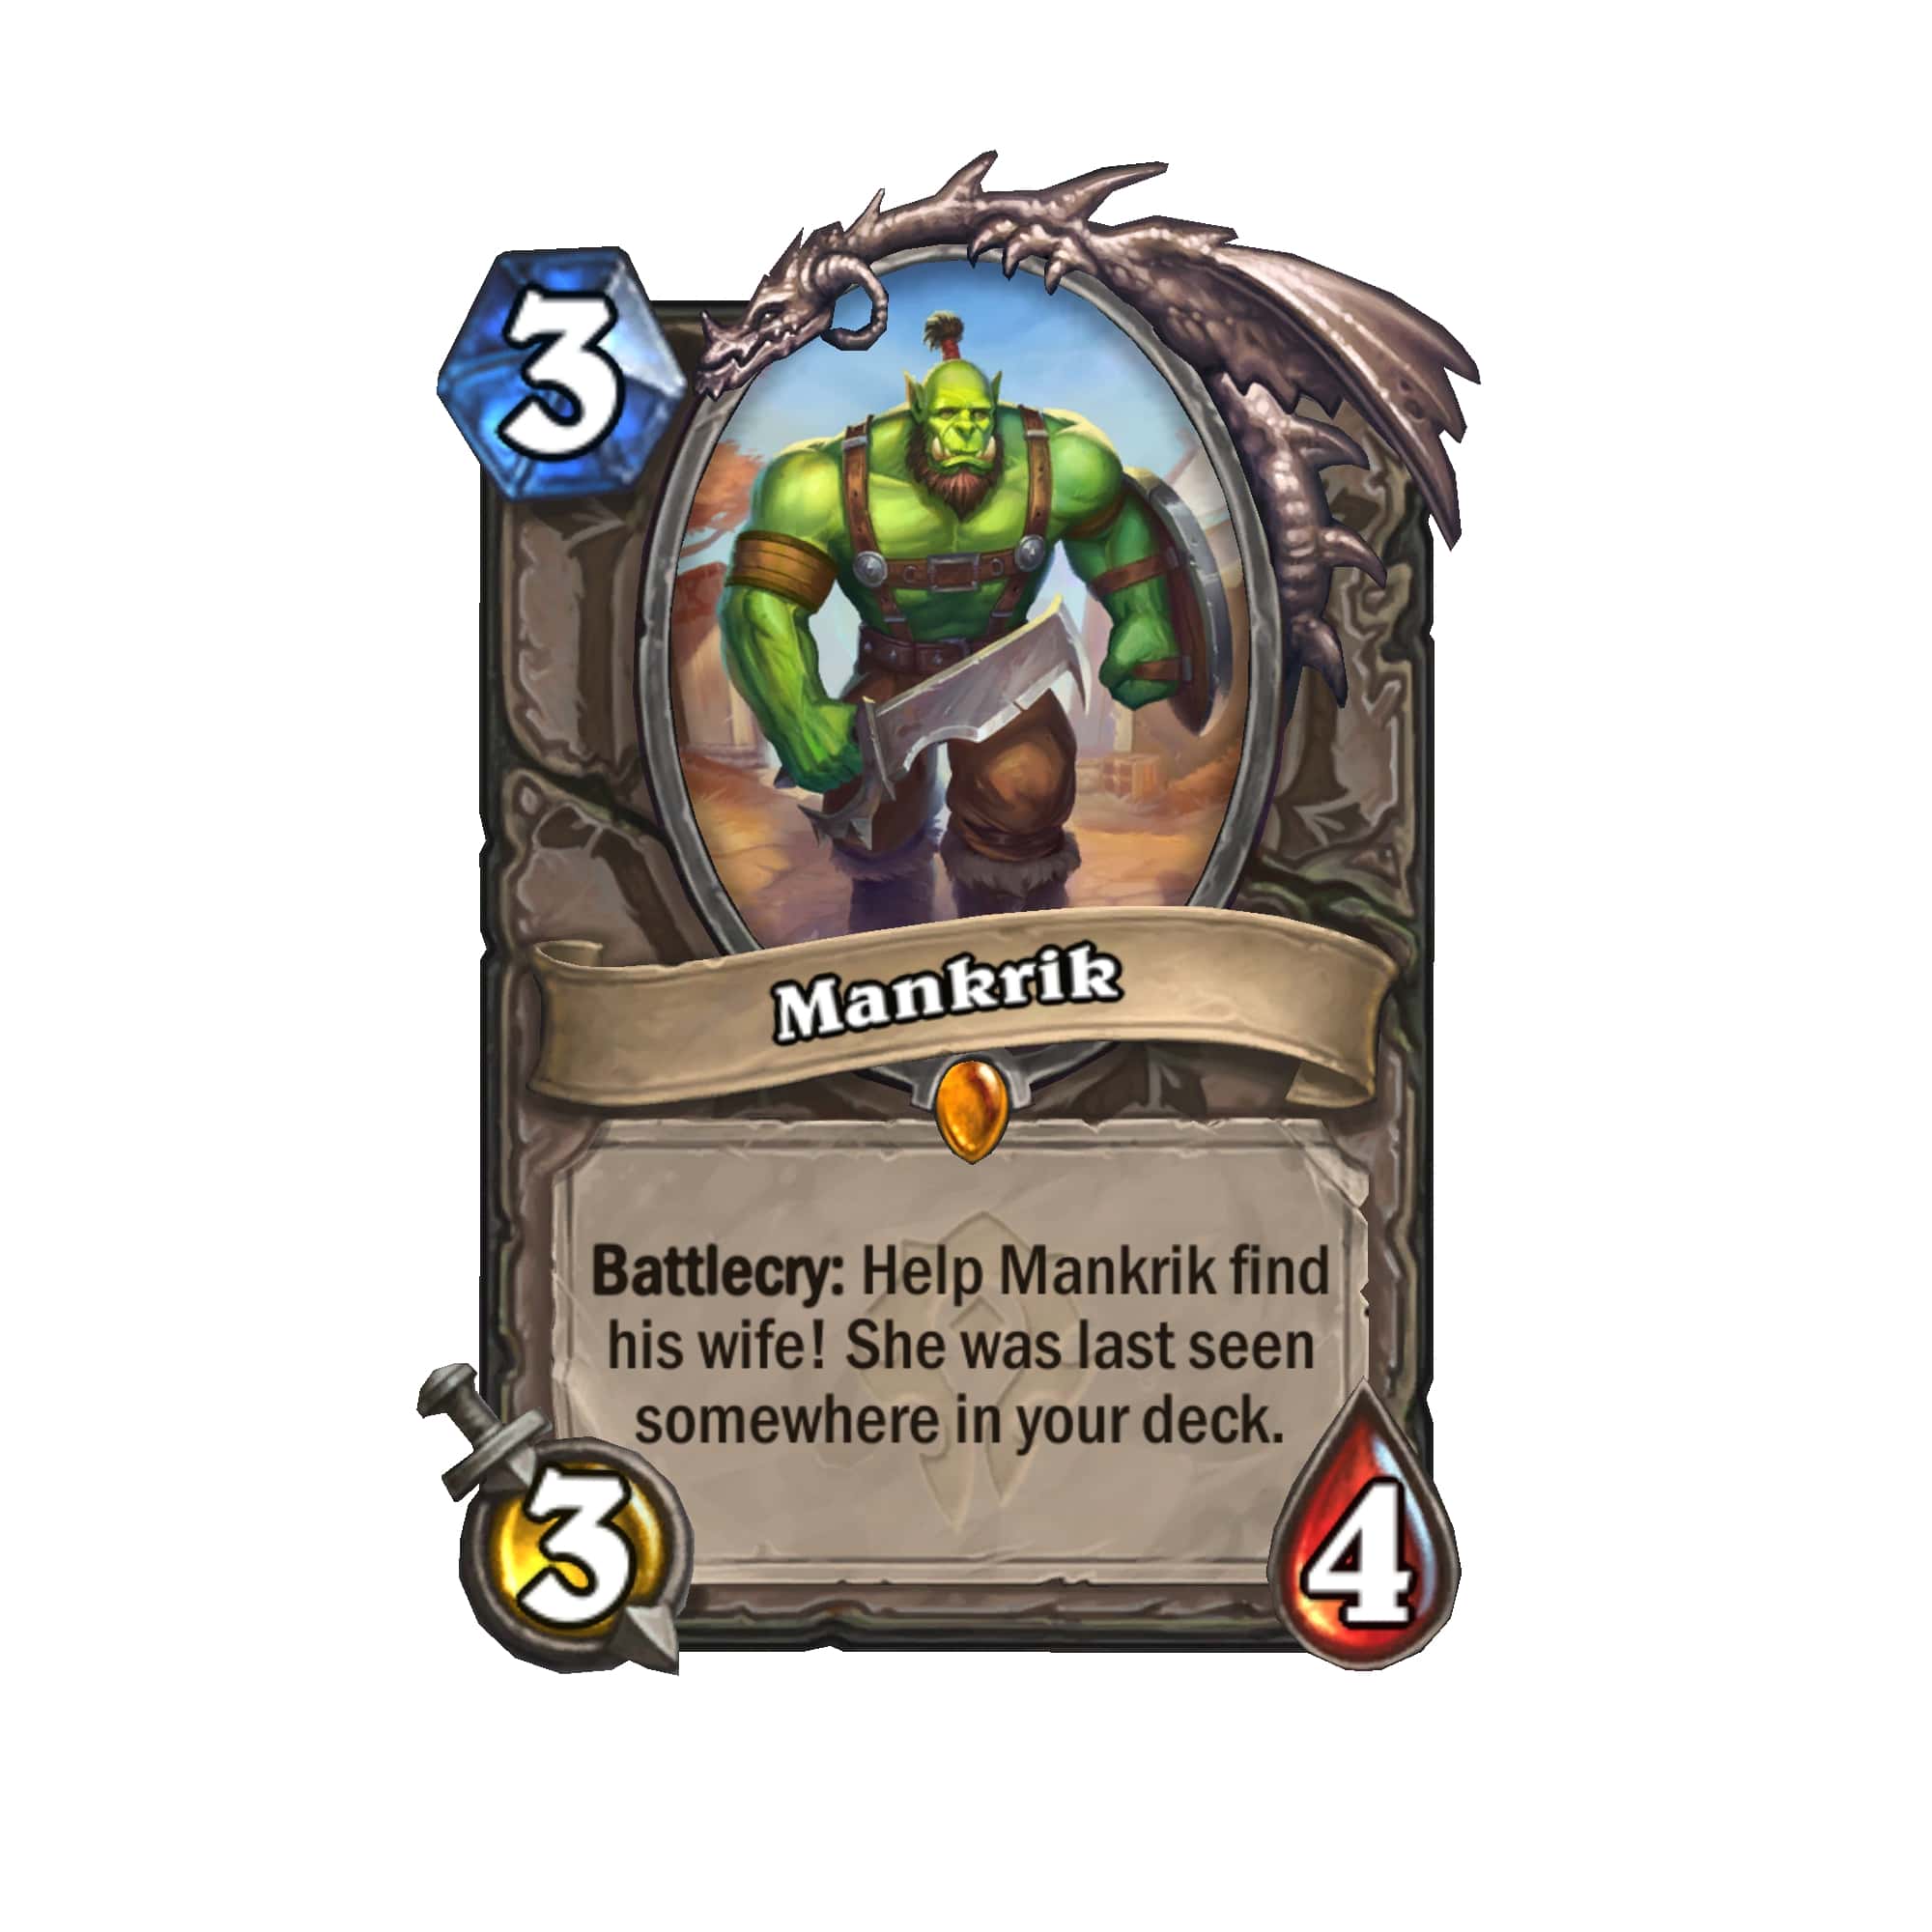 A card from Hearthstone's Forged in the Barrens set